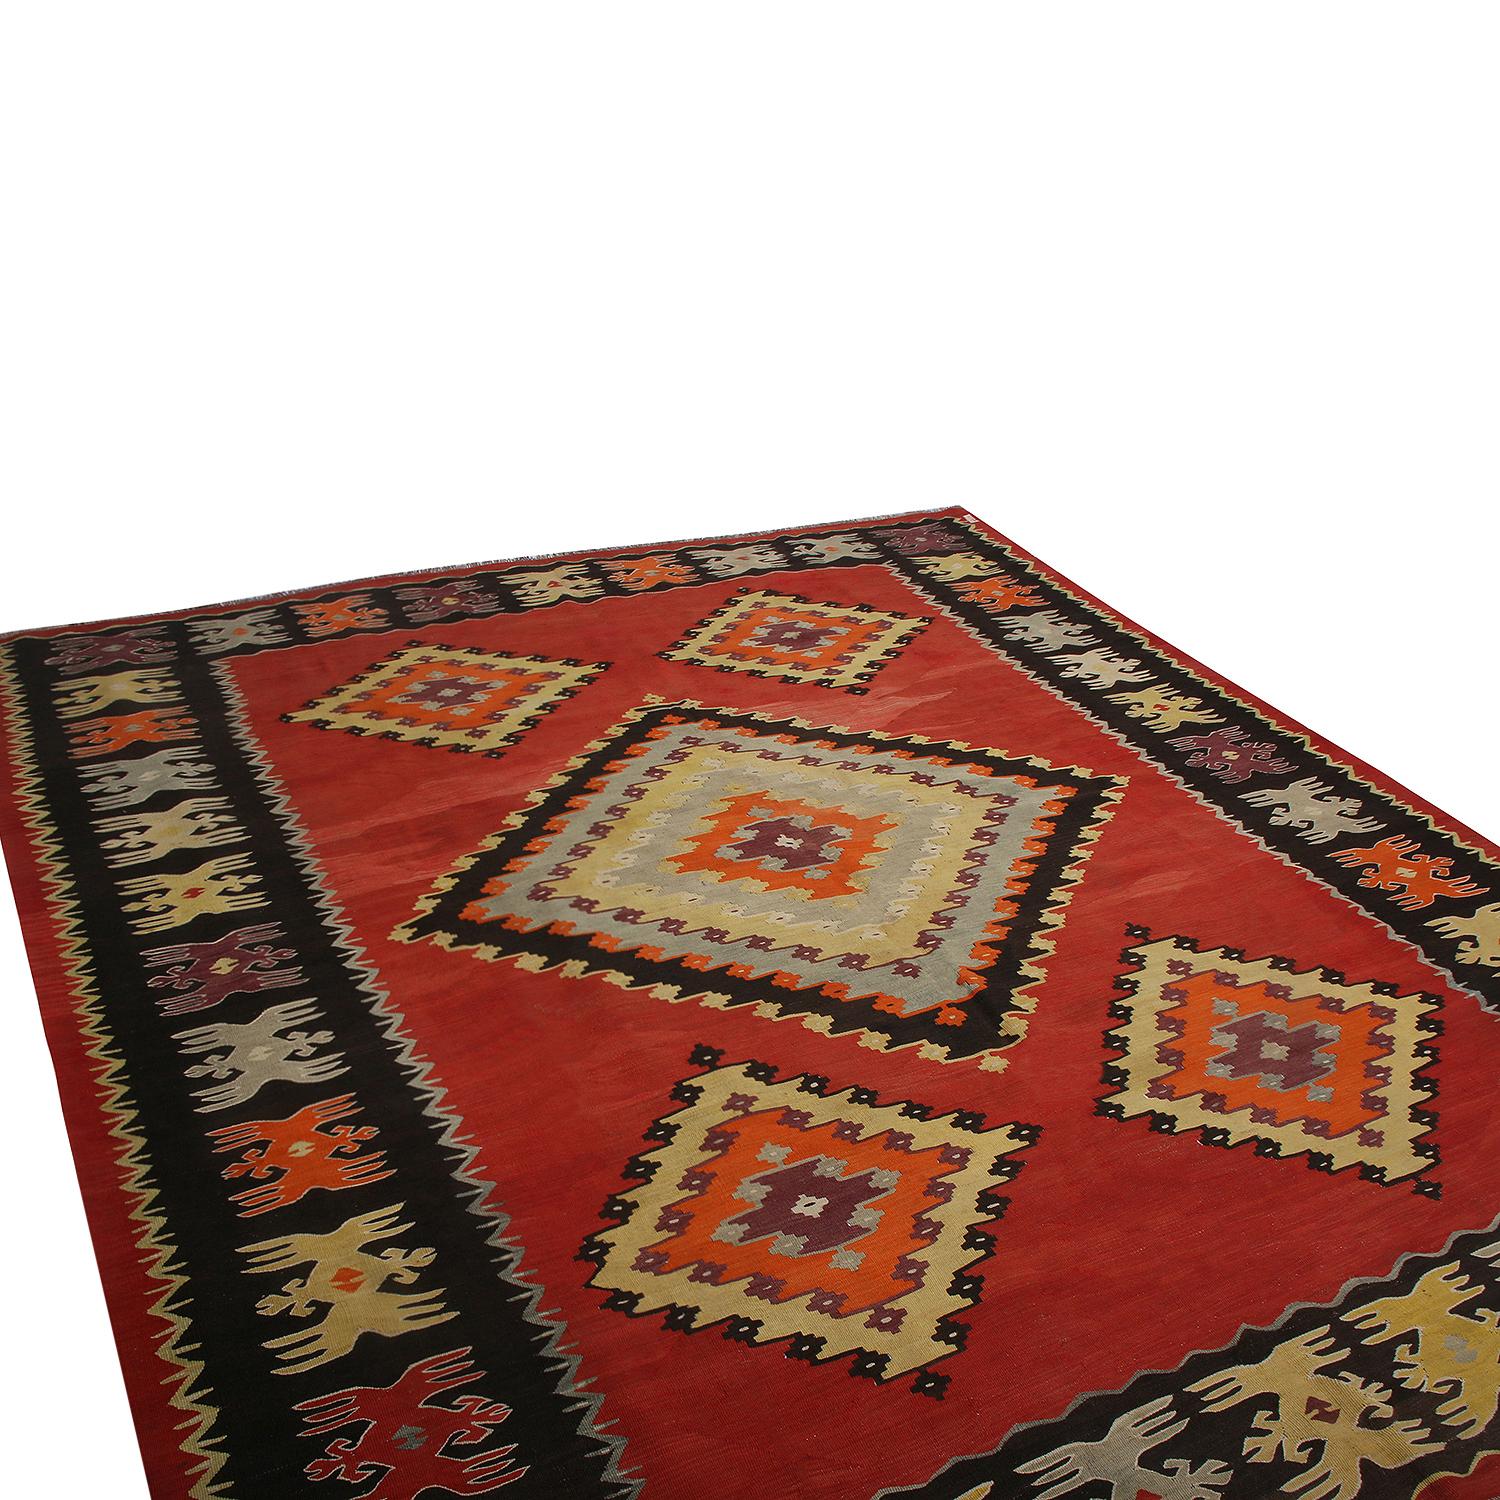 Handwoven in Turkey originating between 1950-1960, this vintage midcentury 8’ x 10’ wool Kilim hails from the seaside town of Sarkoy (Sarköy), hosting an uncommon black border and a similarly rare variation of the tribal diamond pattern highlighting